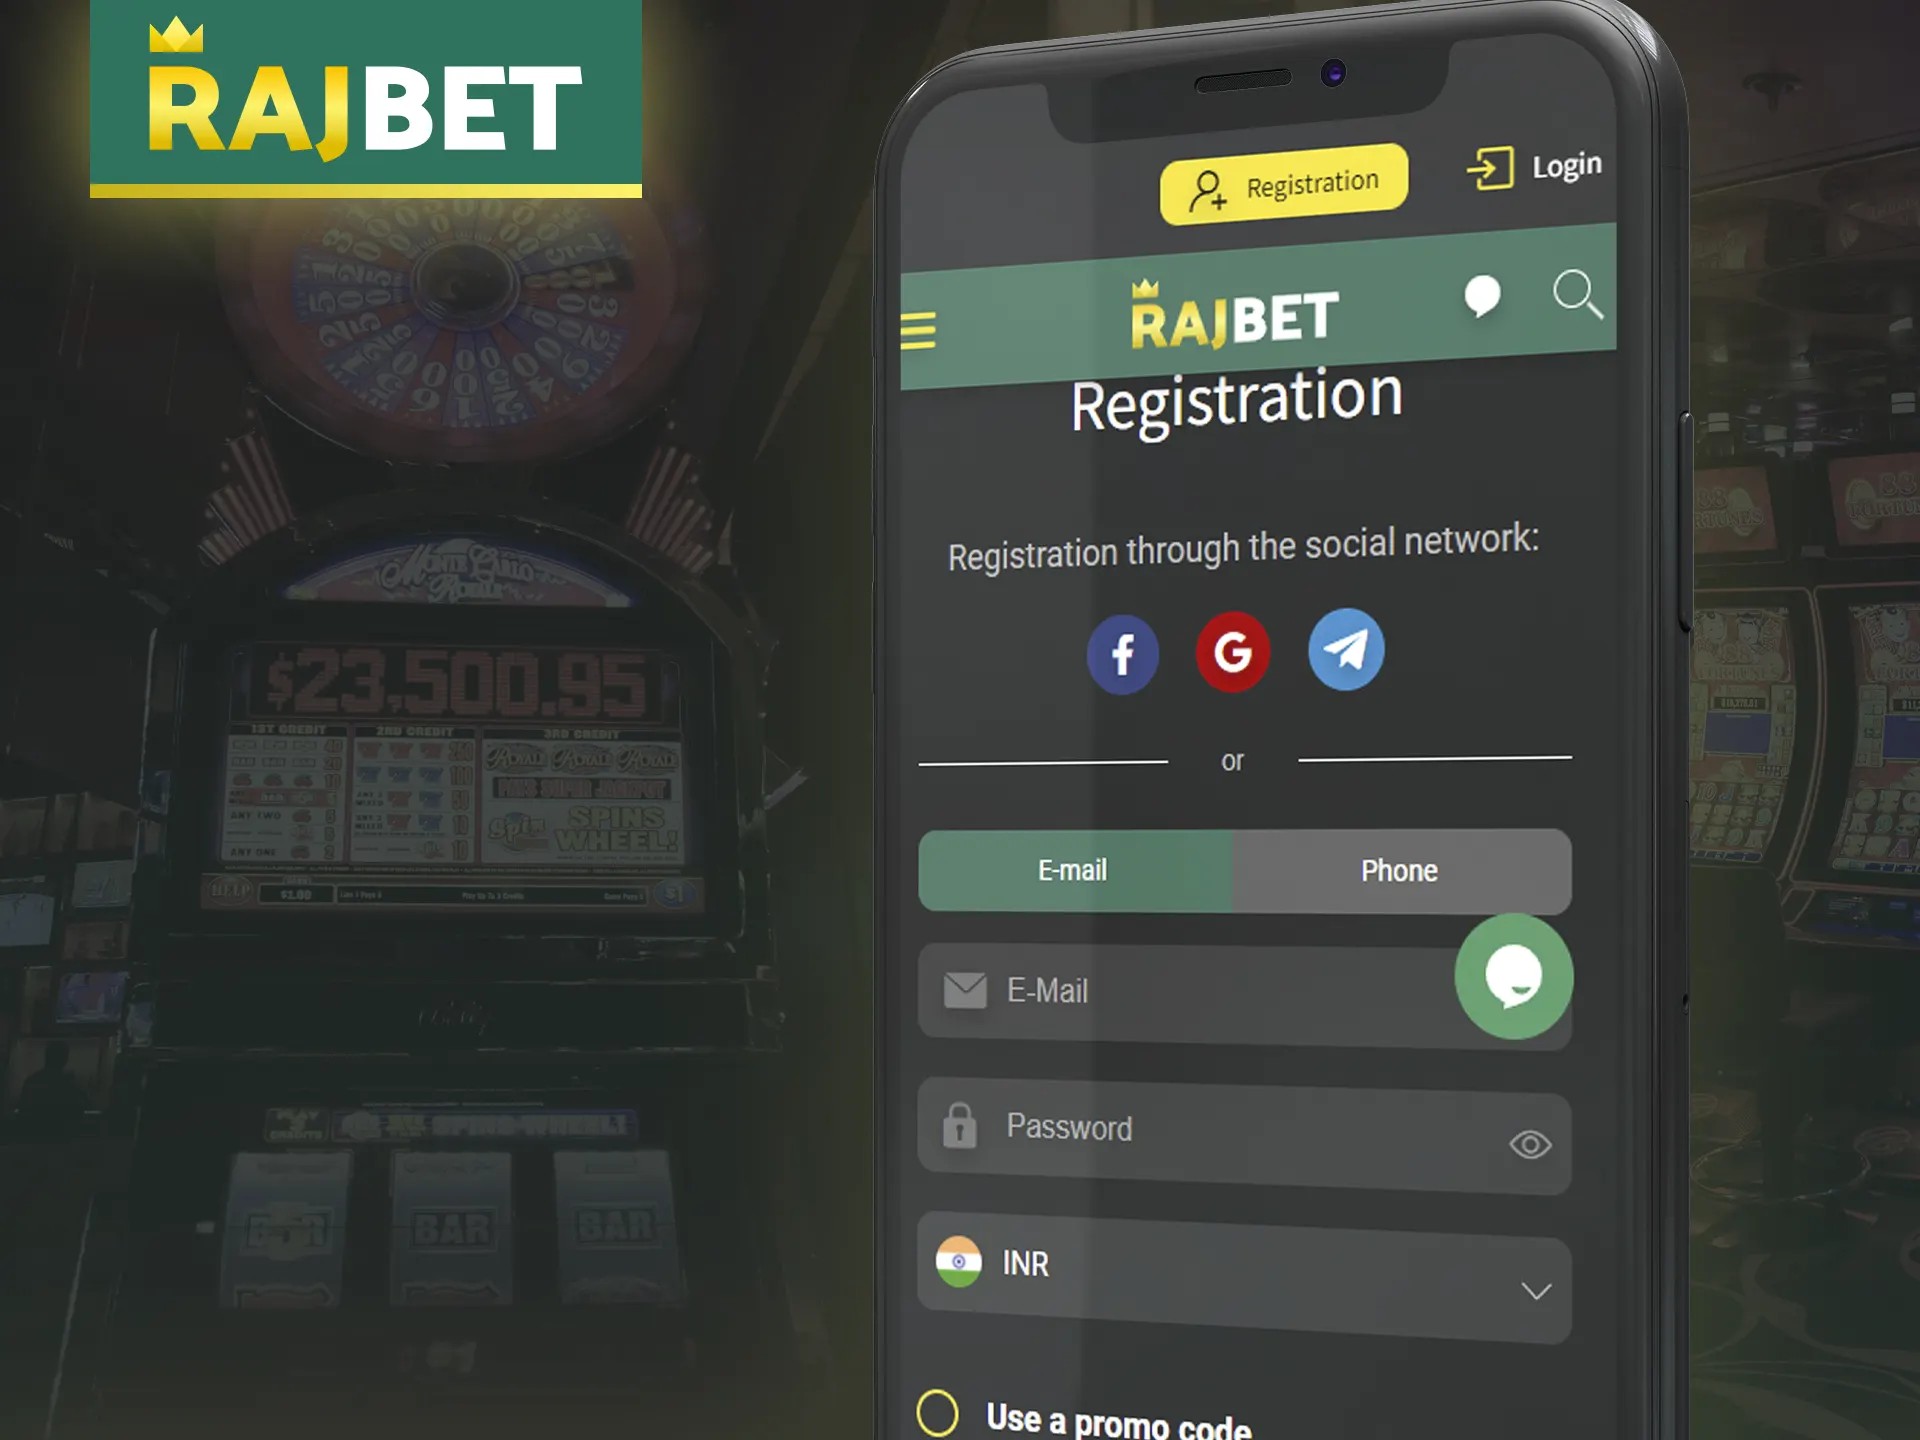 Go through a quick registration in the Rajbet mobile app.